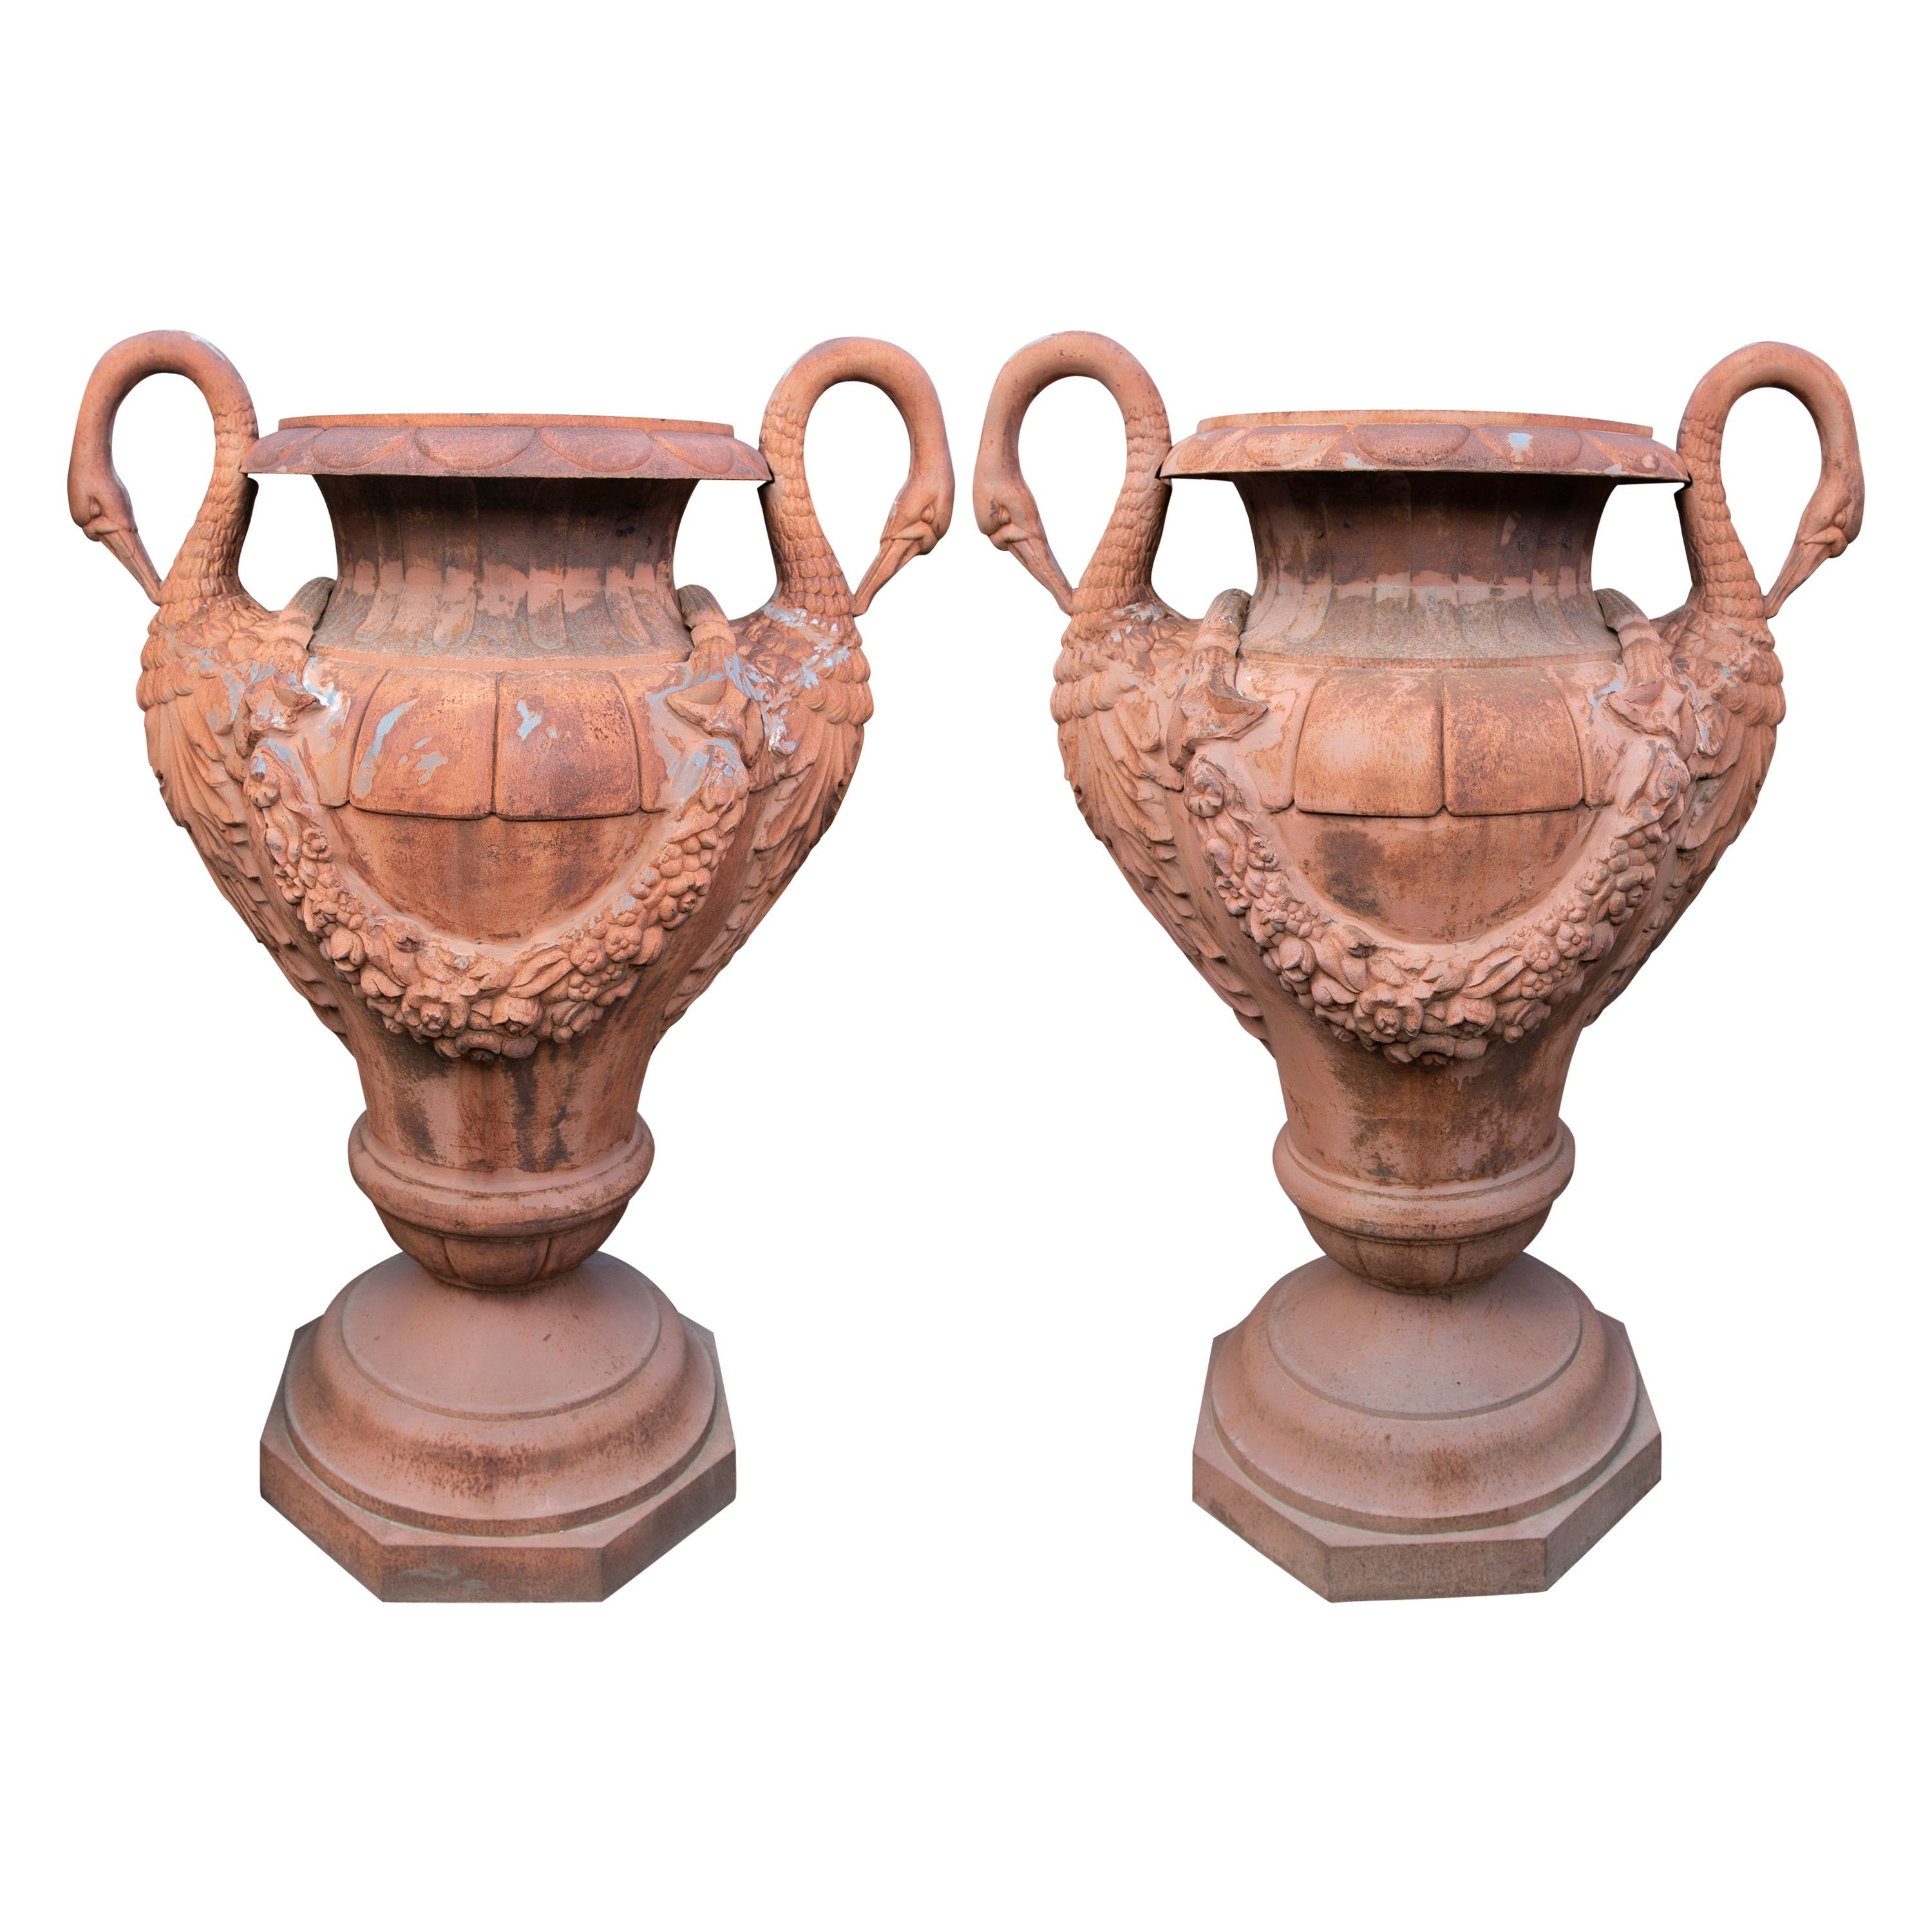 Pair of Monumental 1990s Spanish Classical Cast Iron Urns w/ Swan Shaped Handles